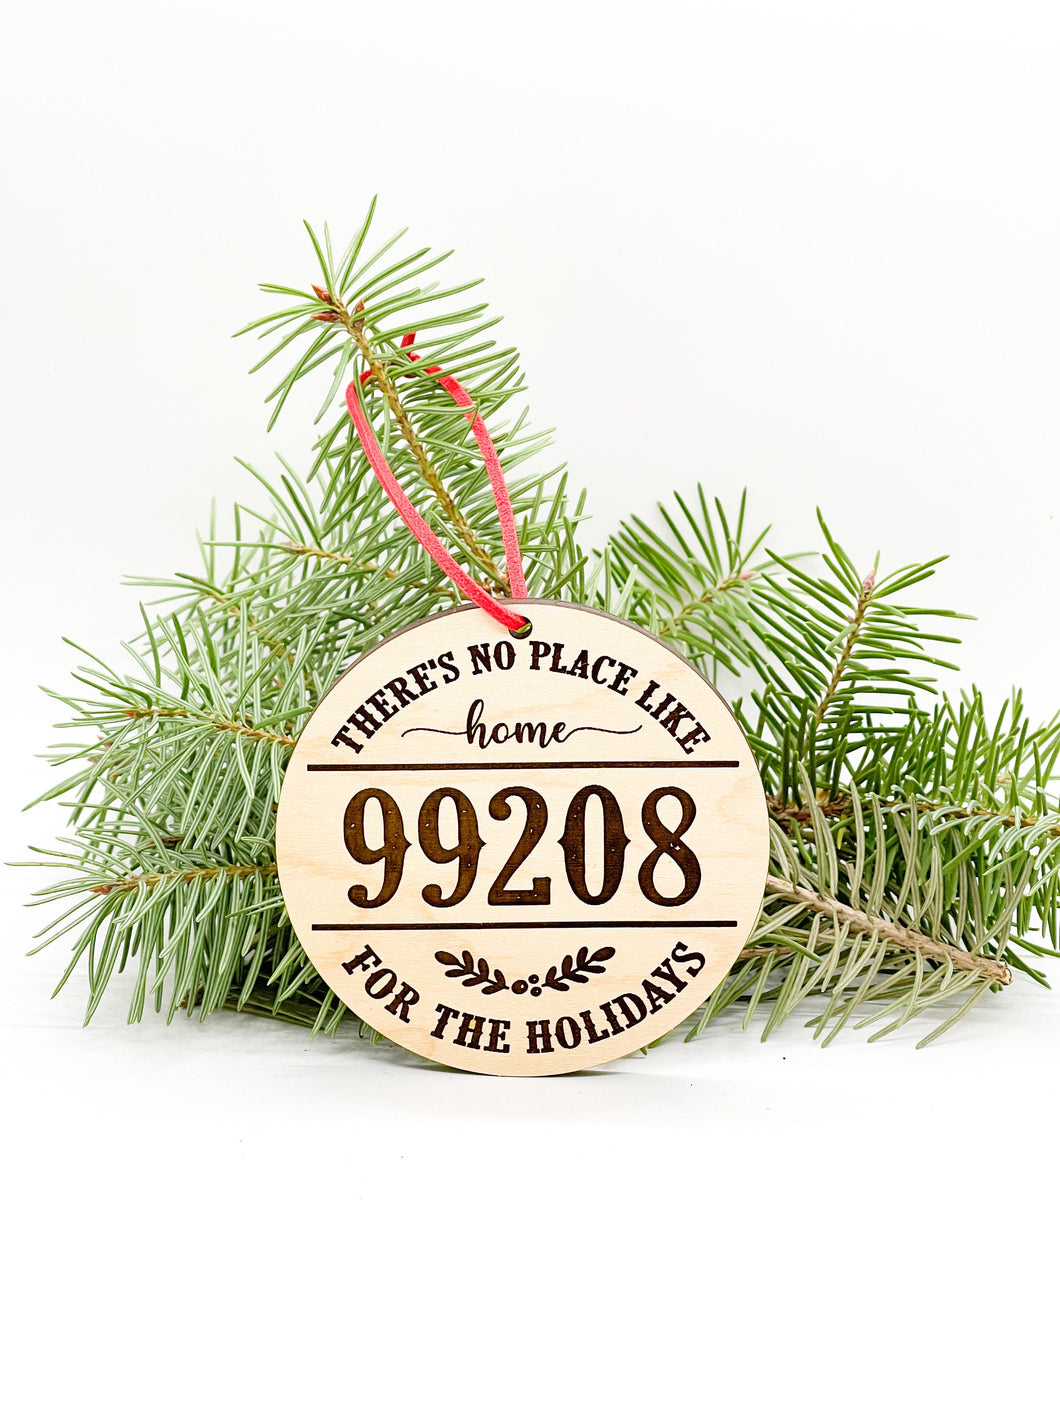 There's No Place Like Home Zip Code Ornament | Customized Holiday Ornament